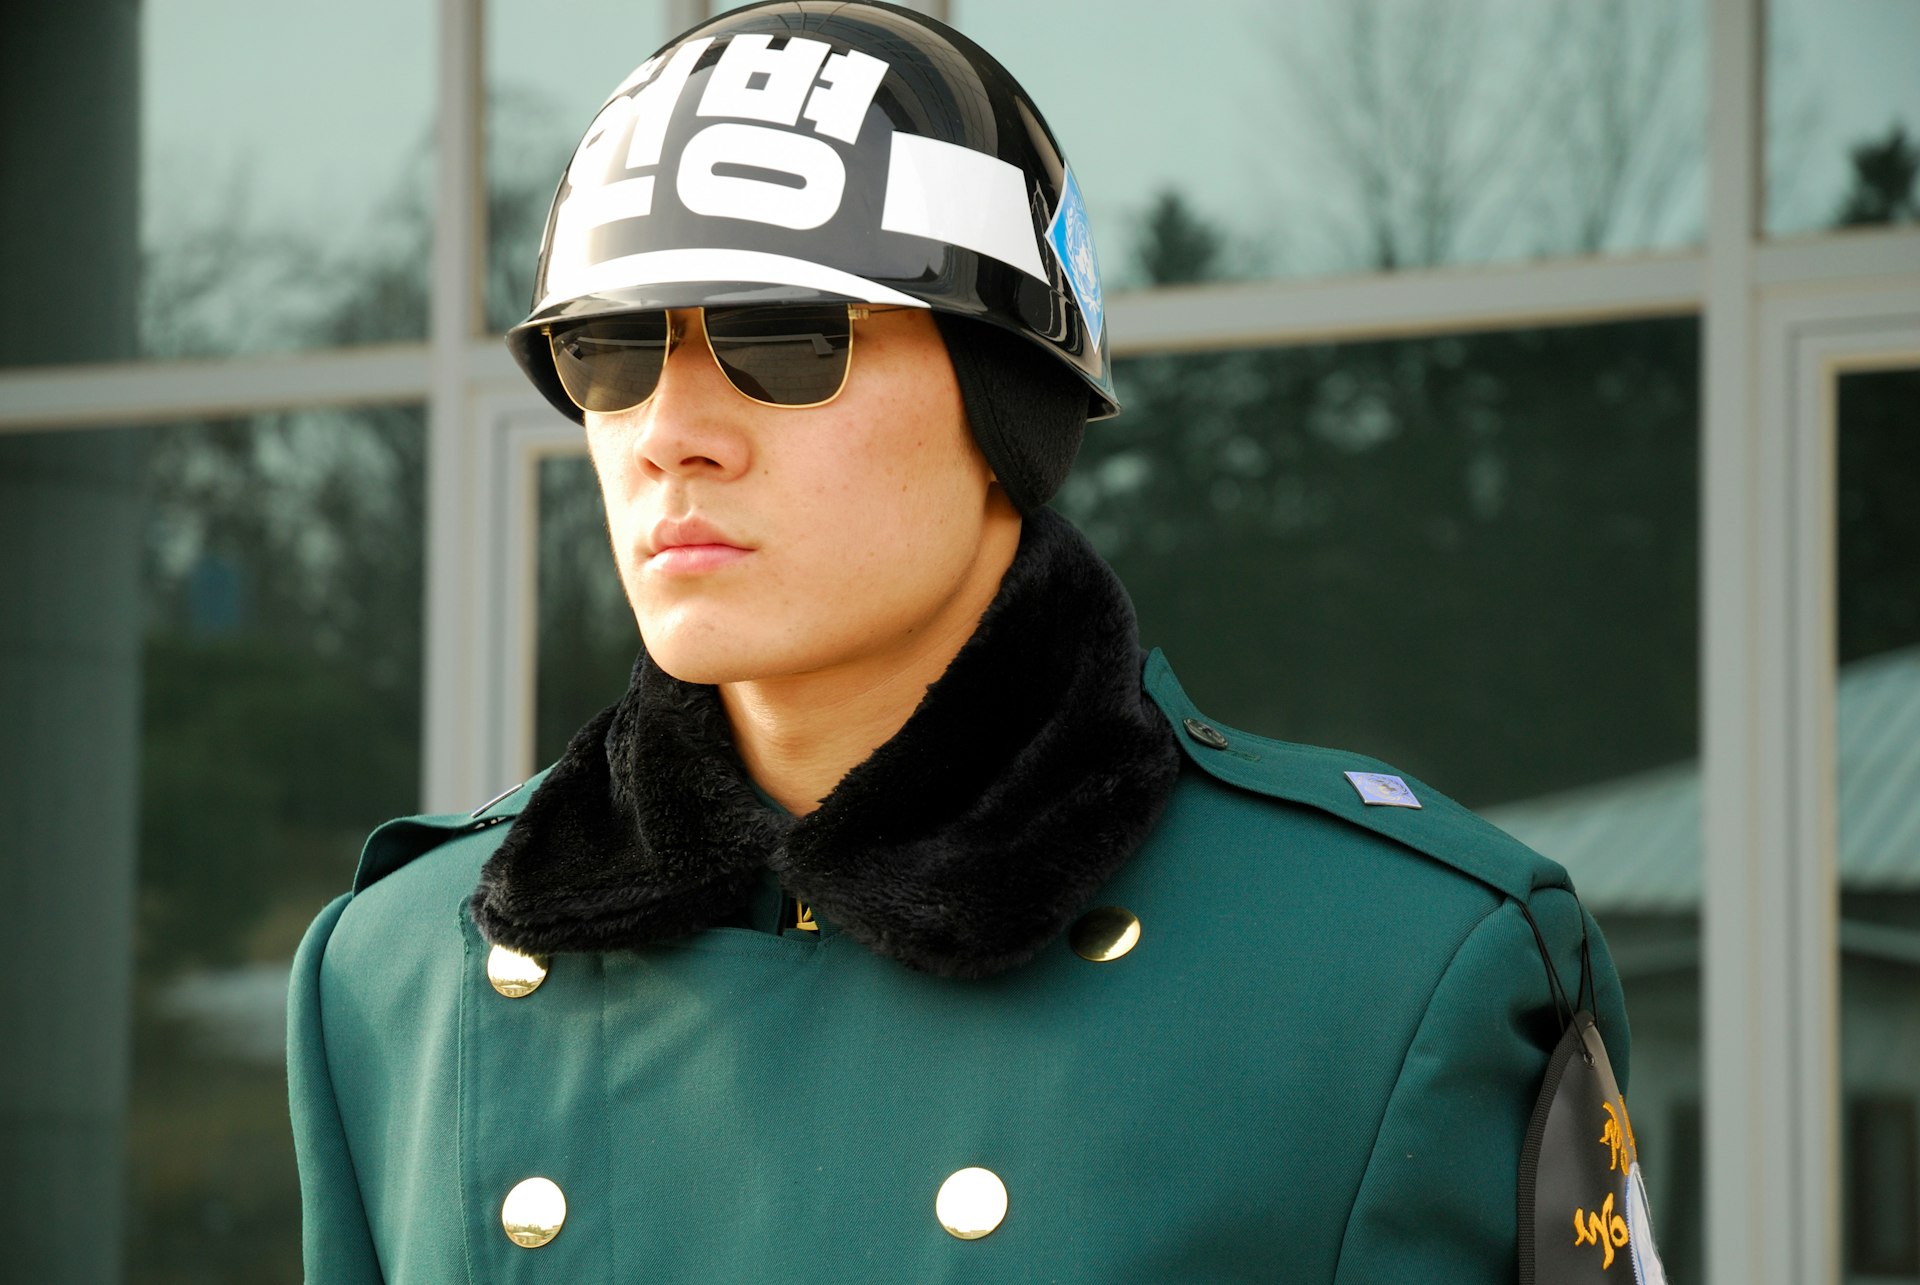 A South Korean guard in sunglasses and a helmet stationed at the Demilitarized Zone (DMZ) at the border of South Korea and North Korea